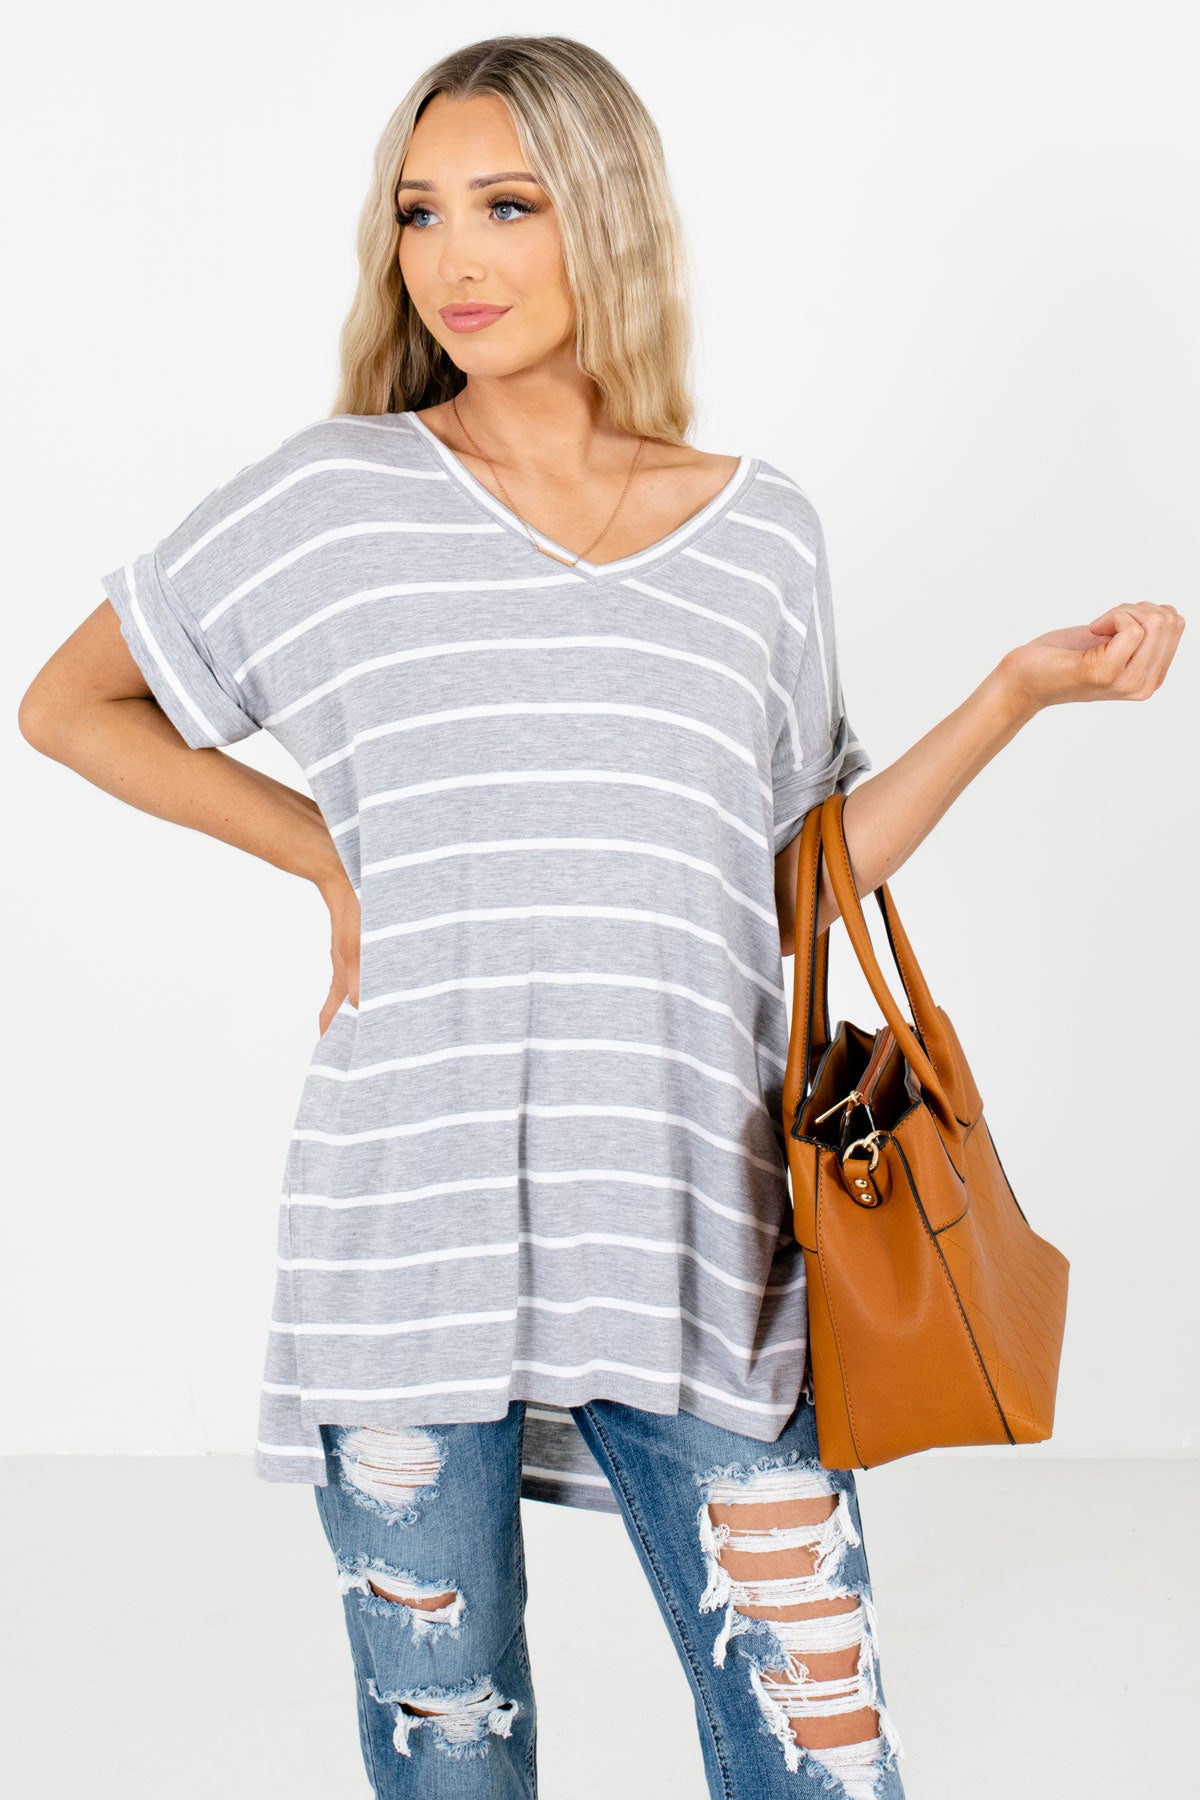 Heather Gray and White Striped Boutique Tops for Women